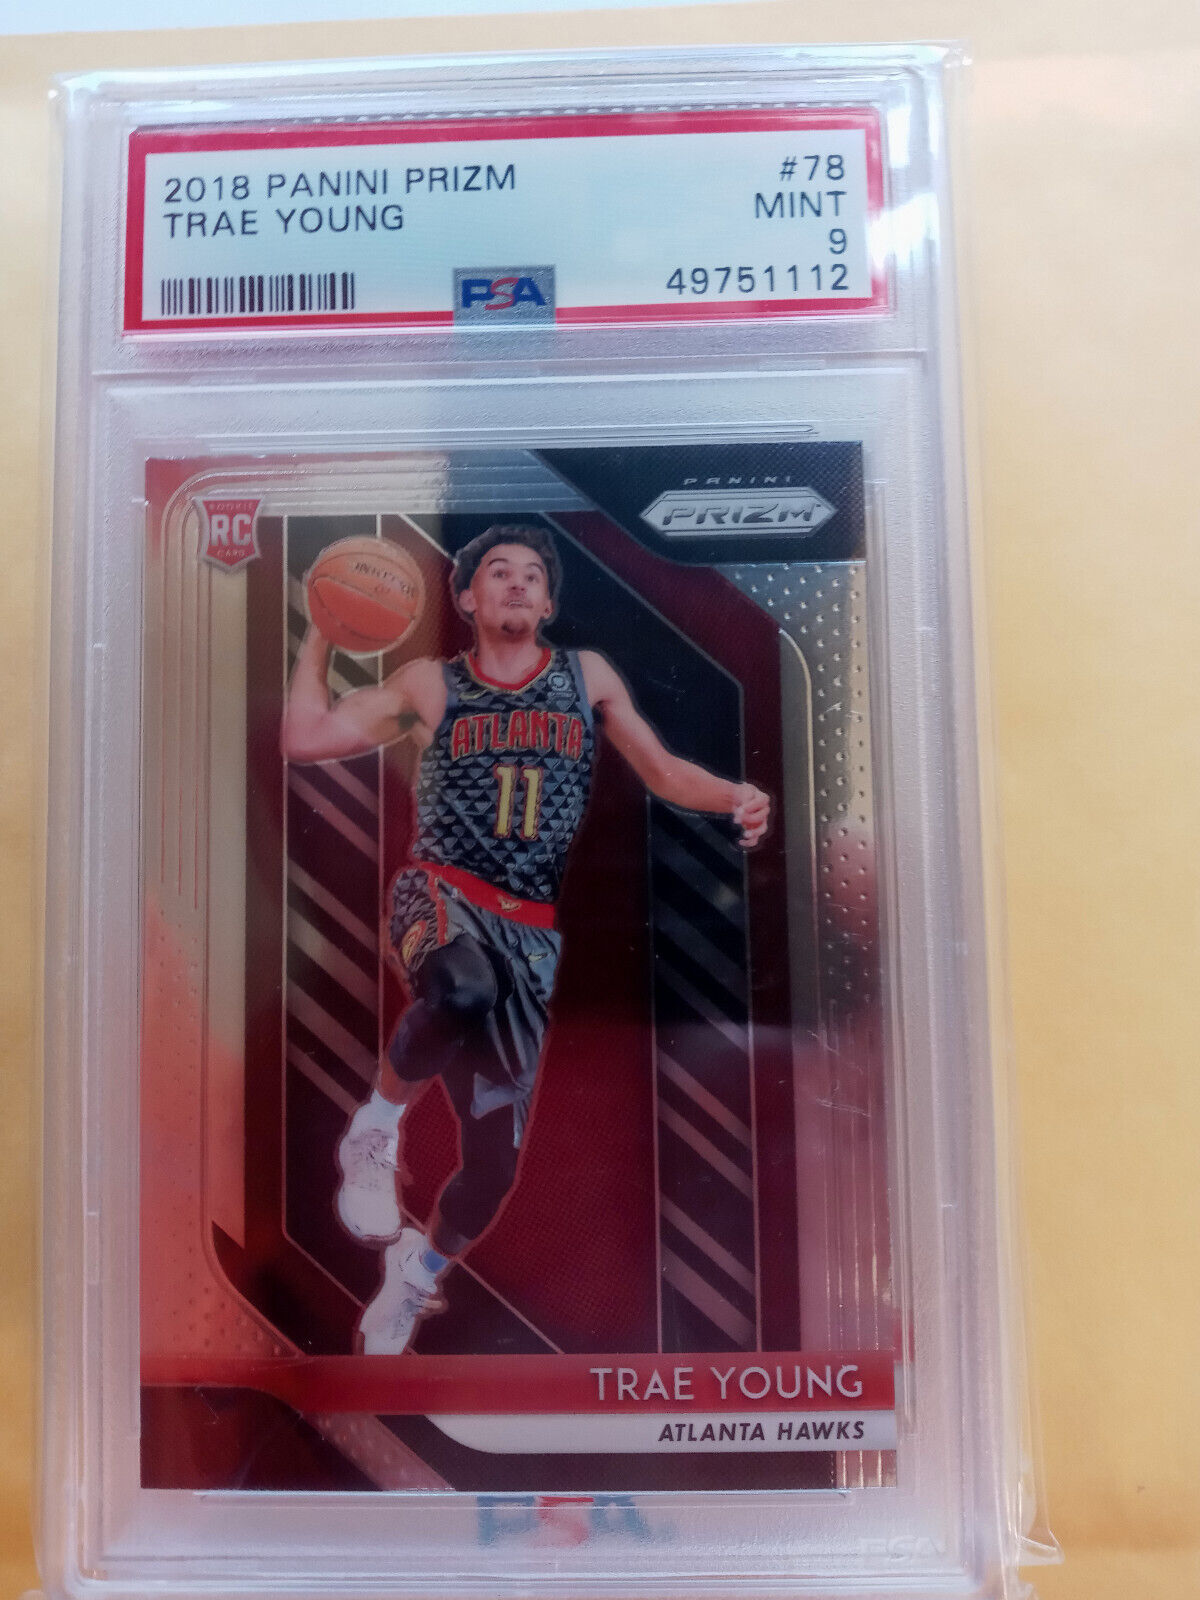 2018-19 Panini Prizm Basketball Trae Young Rookie RC Card #78 - PSA 9 MINT HAWKS